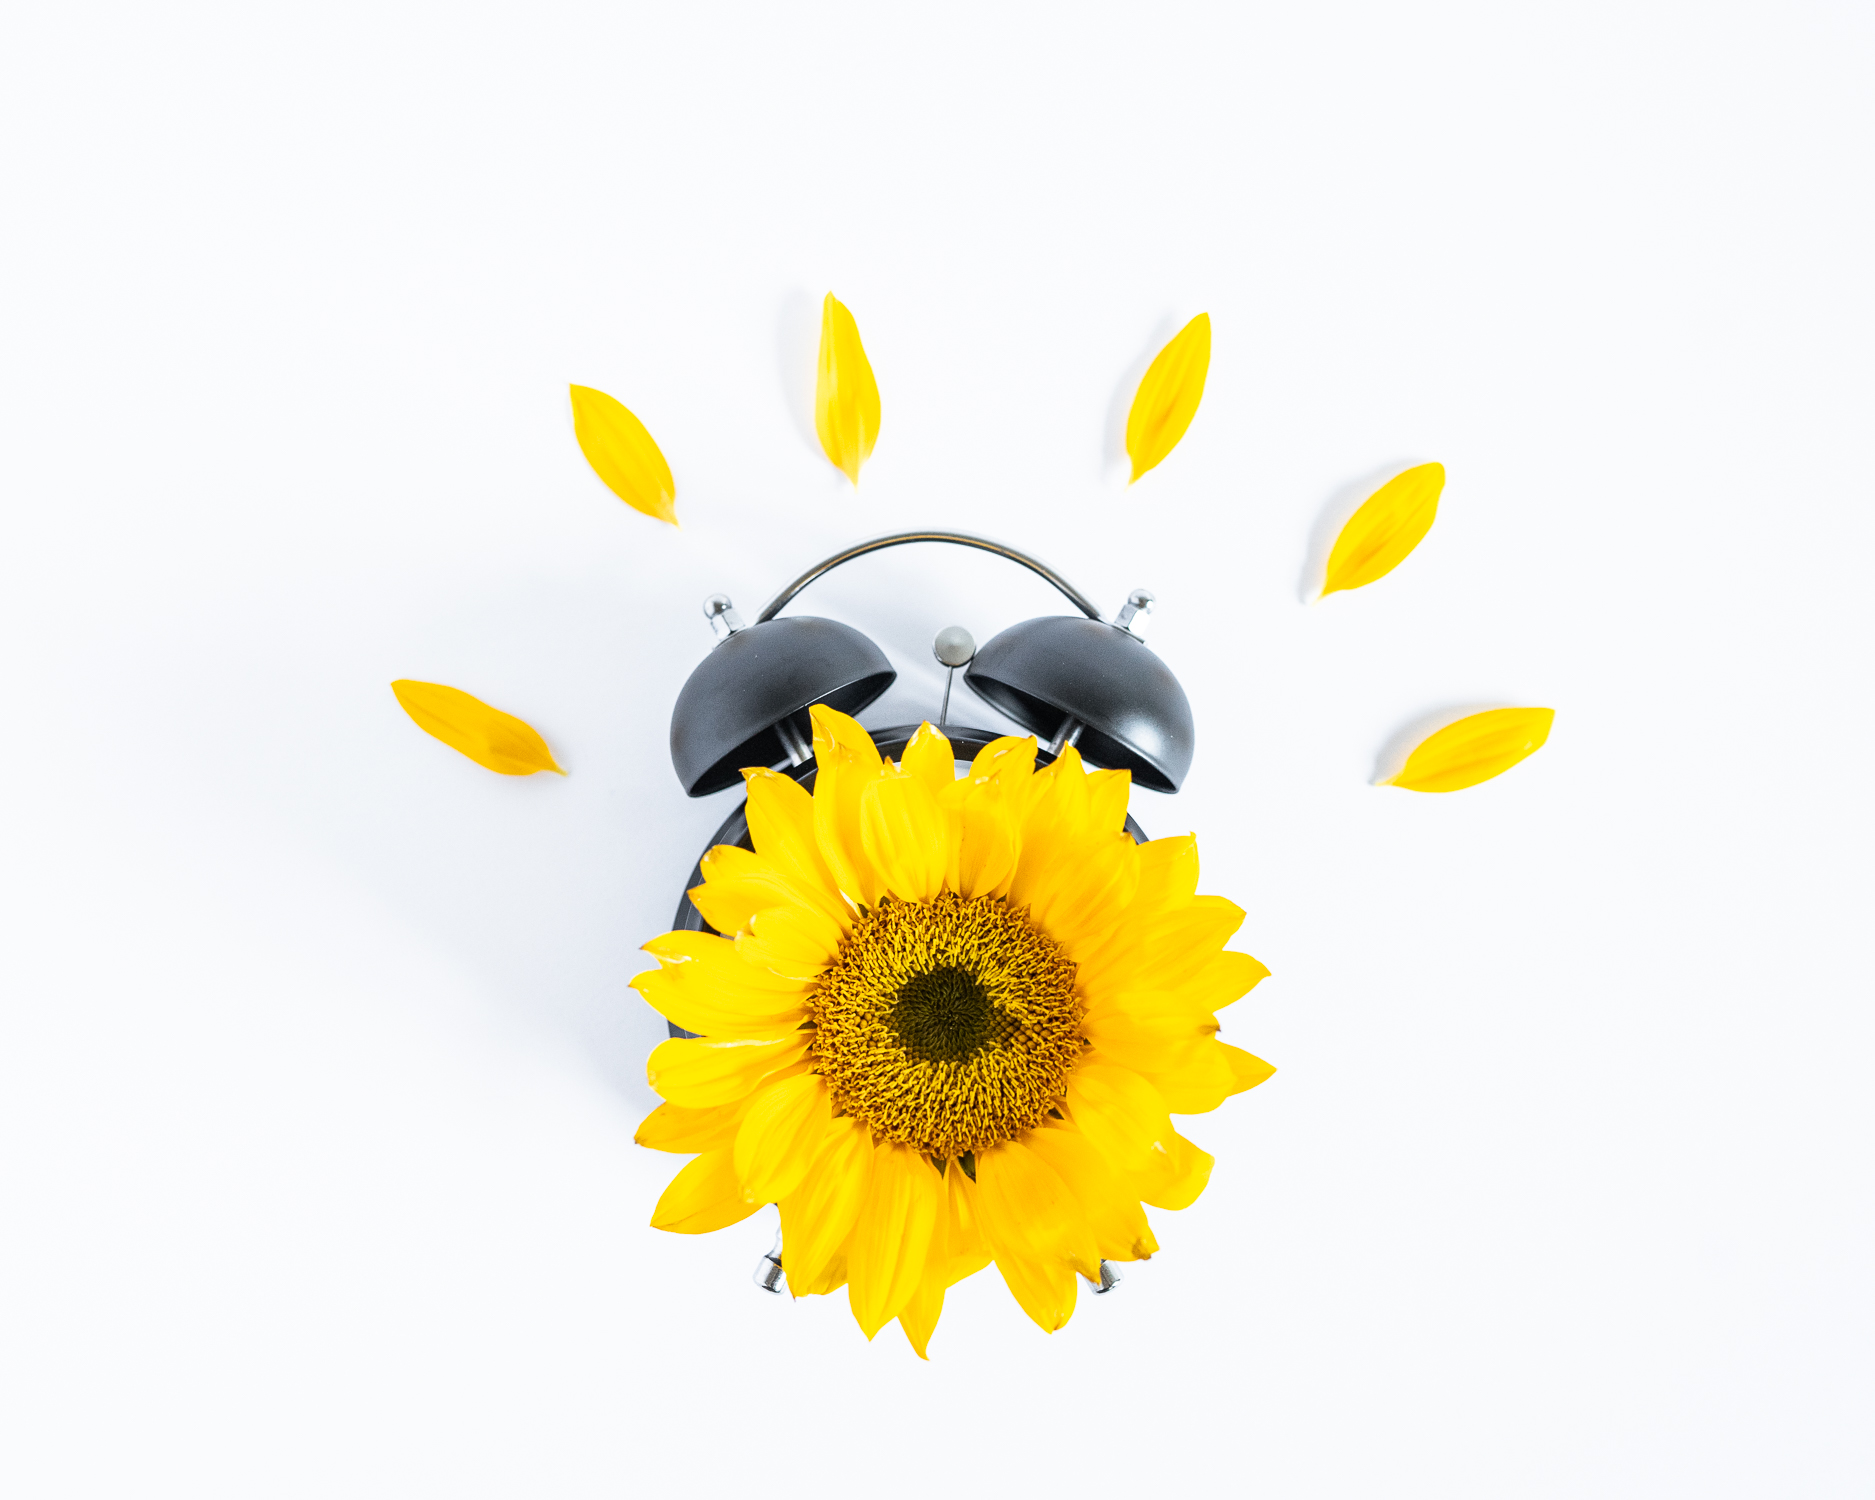 Funny Sunflower Clock with Petals